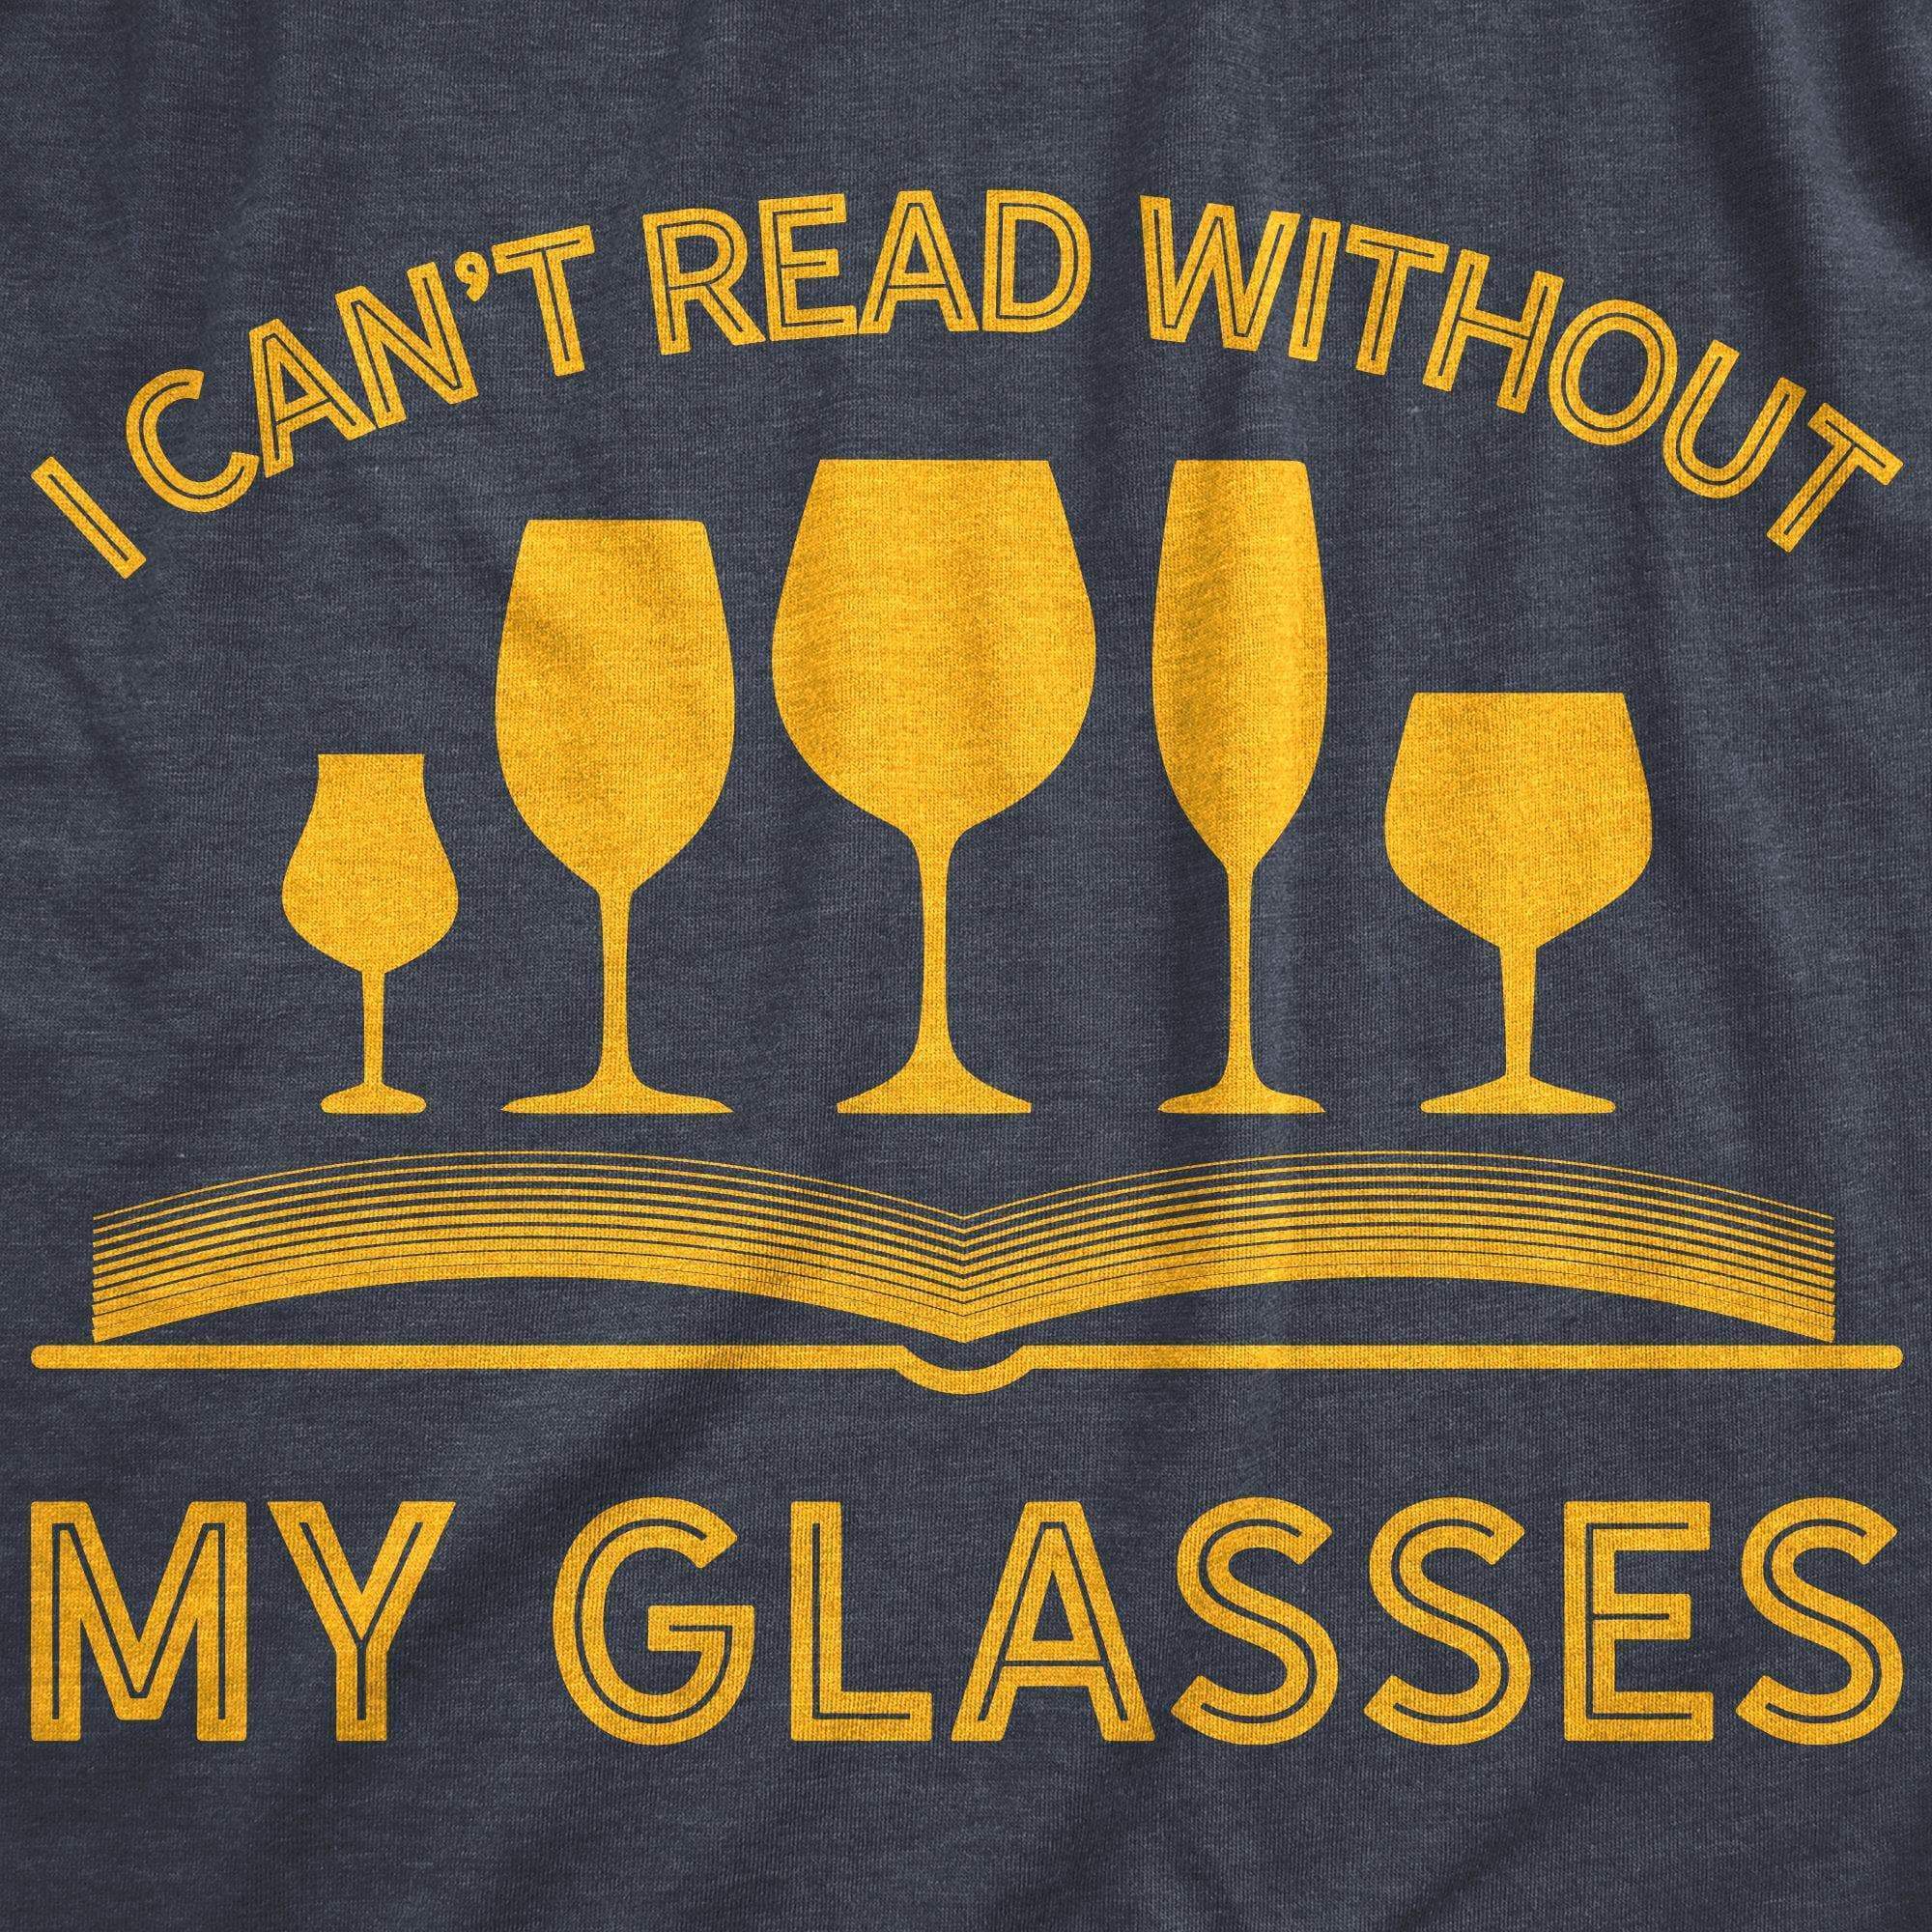 I Can't Read Without My Glasses Women's Tshirt - Crazy Dog T-Shirts